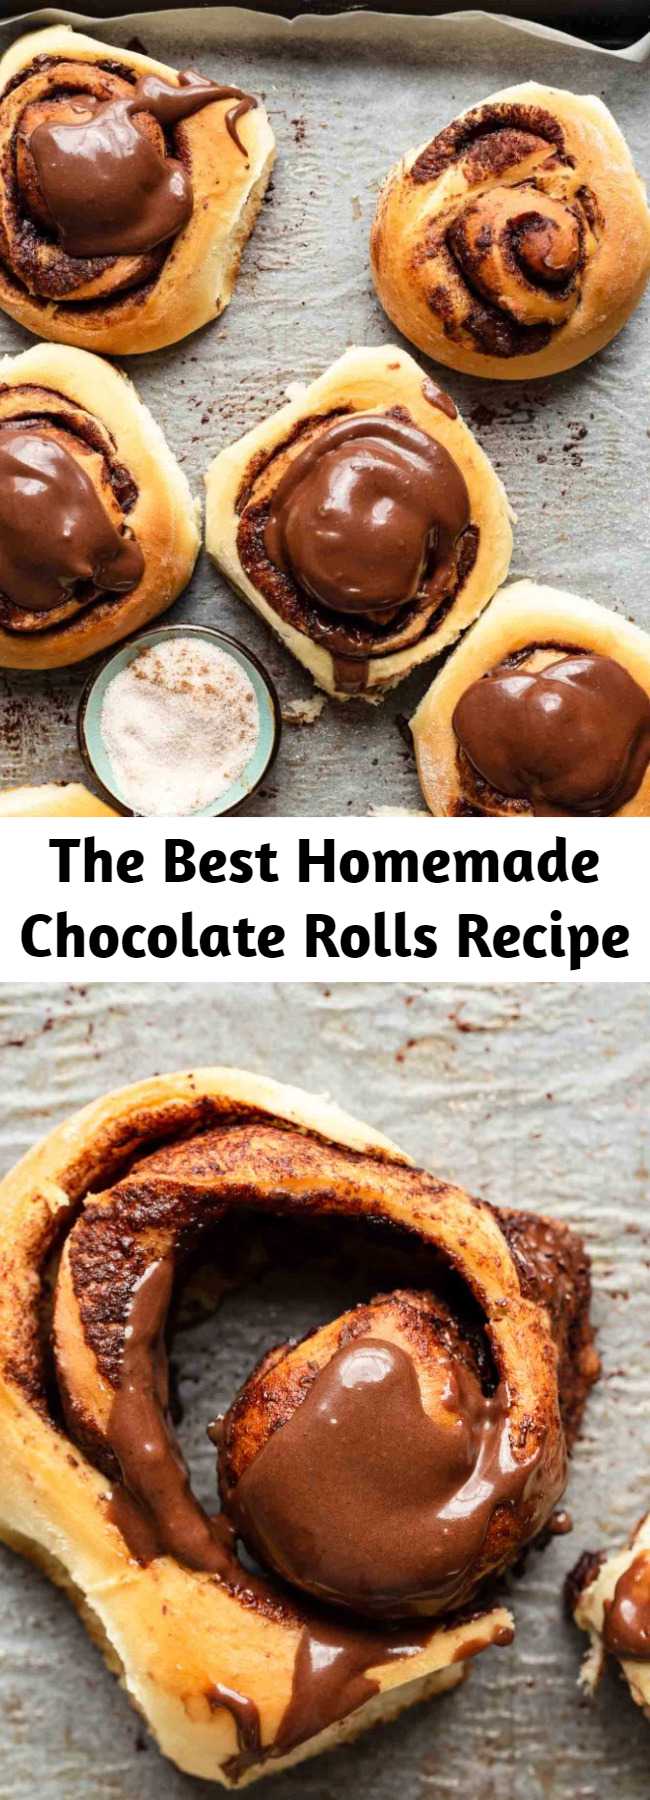 The Best Homemade Chocolate Rolls Recipe - The aroma of these homemade chocolate rolls, while they are baking, is heavenly! Once you bite into these delicious chocolate cinnamon rolls, you will be shocked to know they are so easy to make. You only need 30 minutes of prep time! #baking #cinnamonrolls #chocolate #sweet #desserts